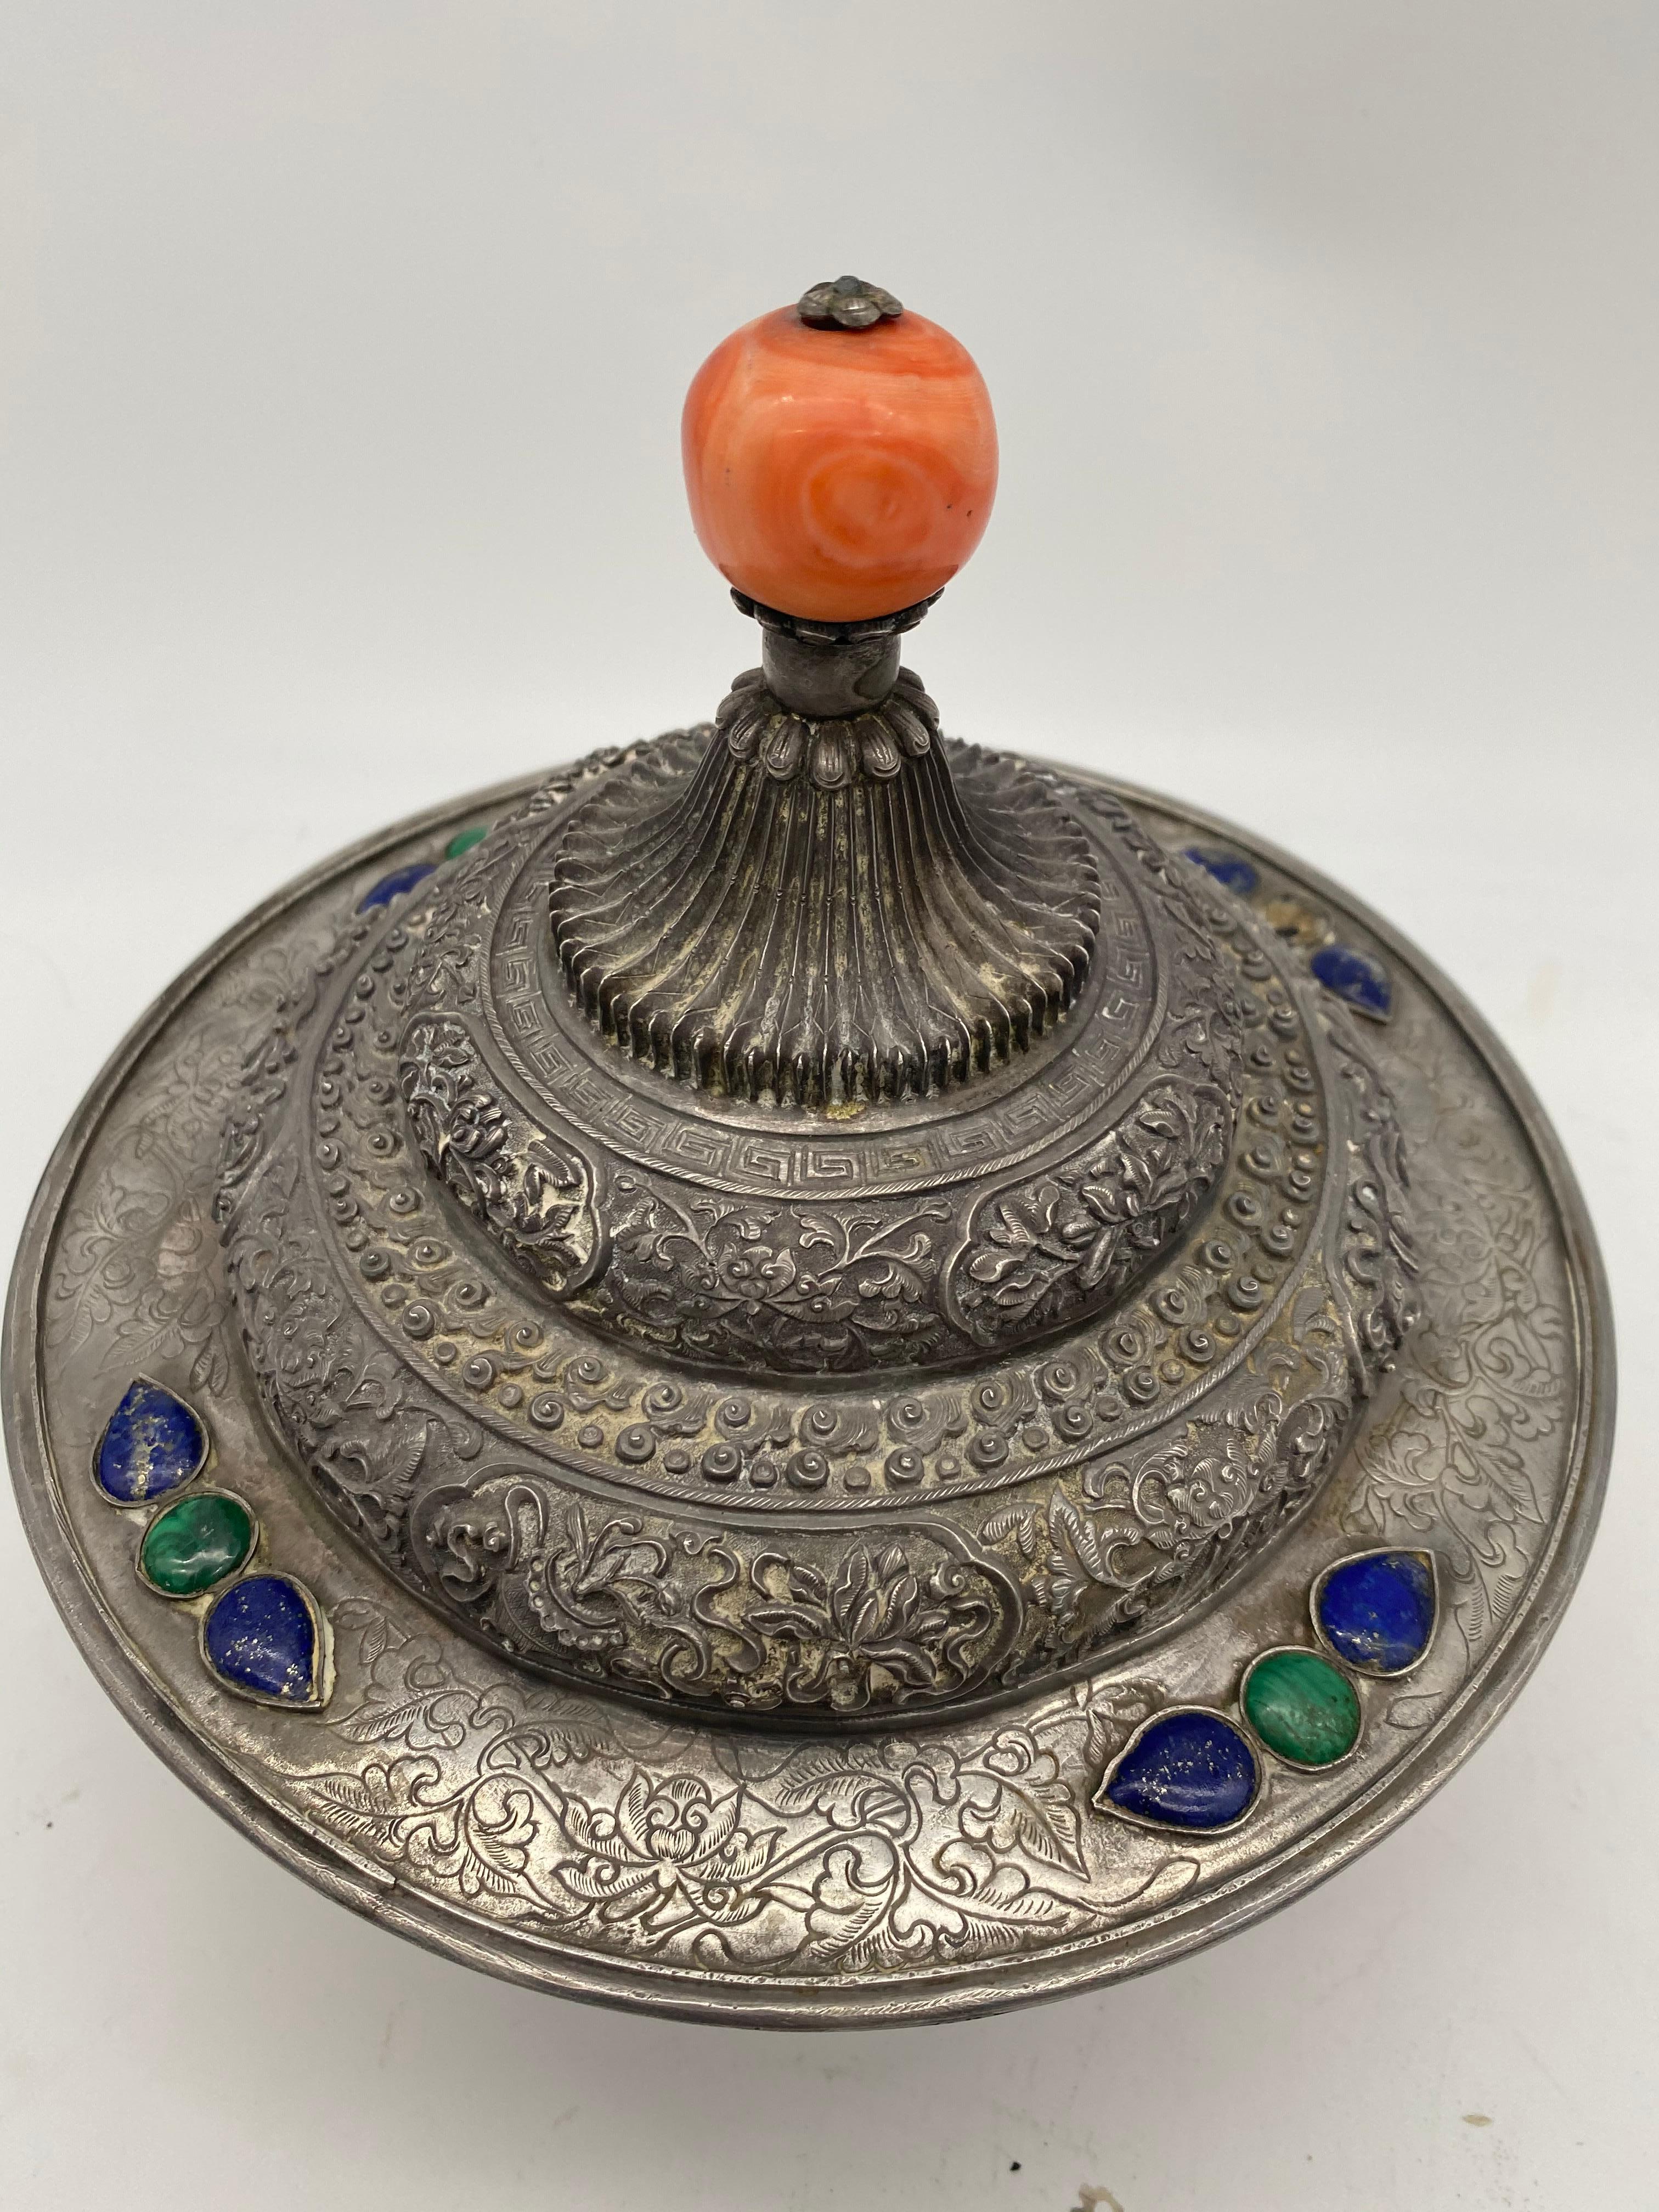 17th Century Rare Tibetan Silver Mounted Brul Covered Bowl with Coral In Good Condition For Sale In Brea, CA